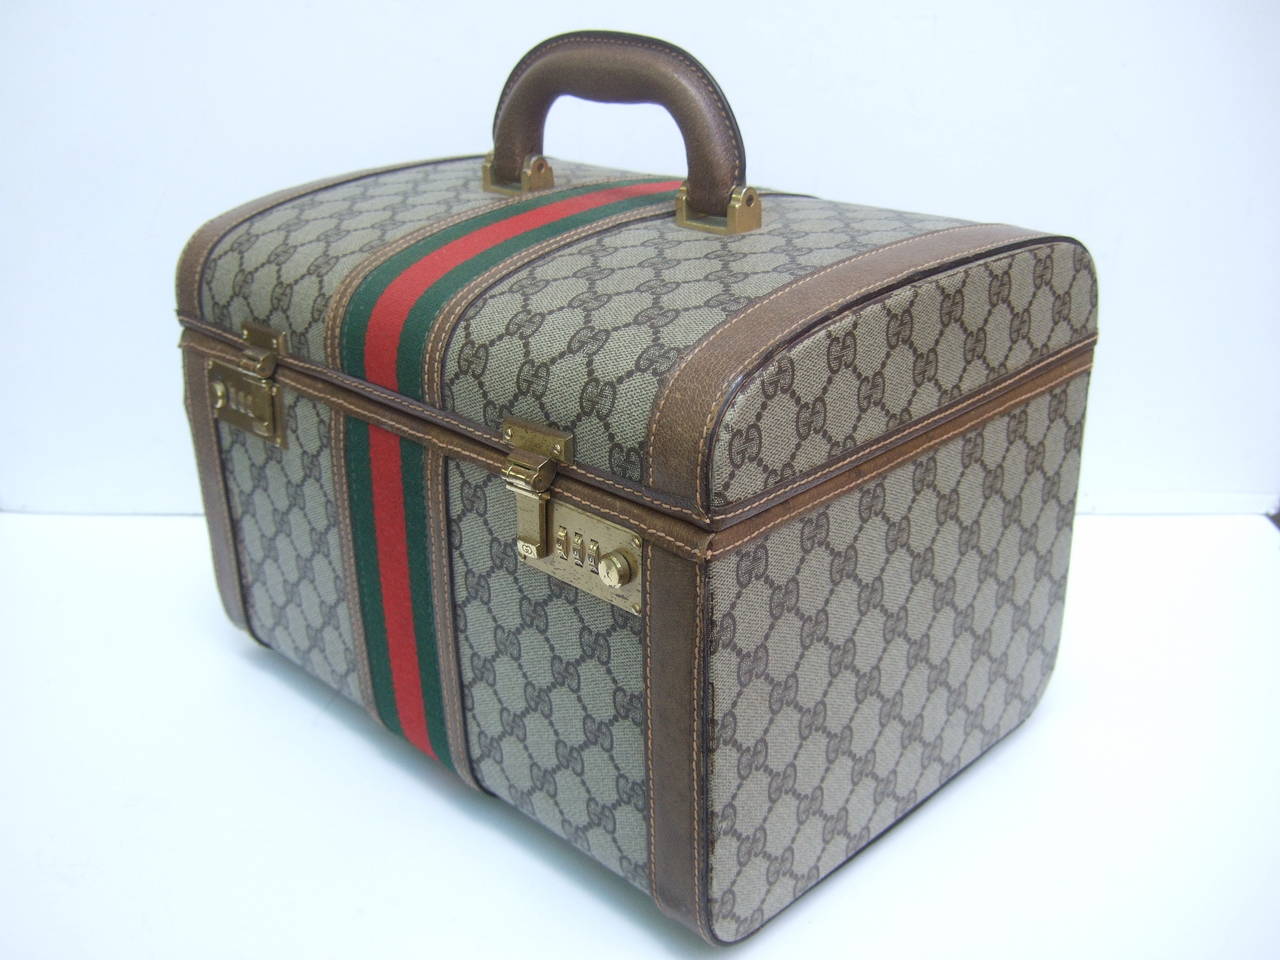 RESERVED SALE PENDING Gucci Luxurious Retro Travel Case Made in Italy c 1970s 1